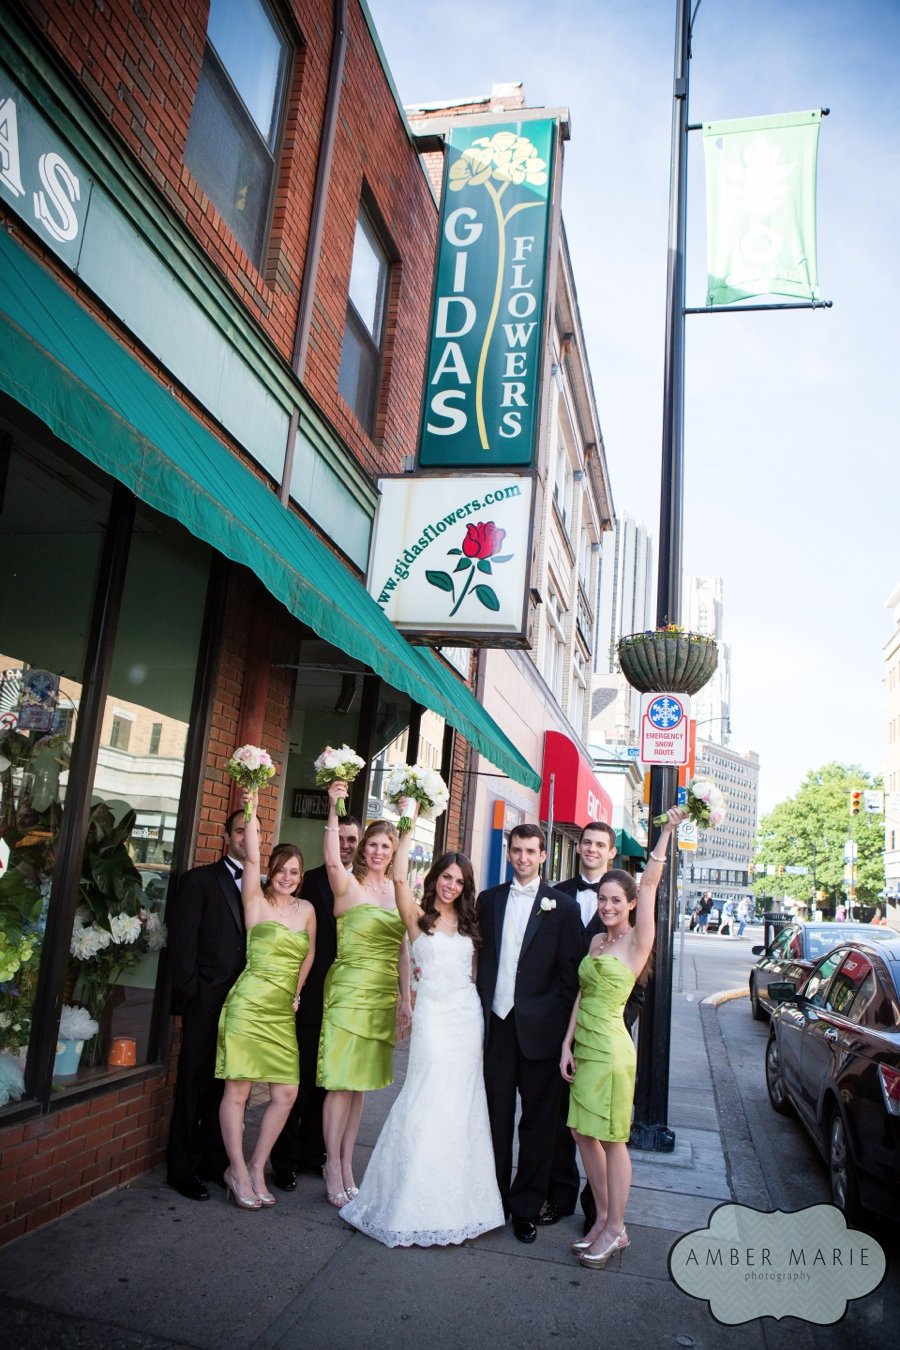 Bride and groom and wedding party at Gidas Flowers, the family business, in Pittsburgh.